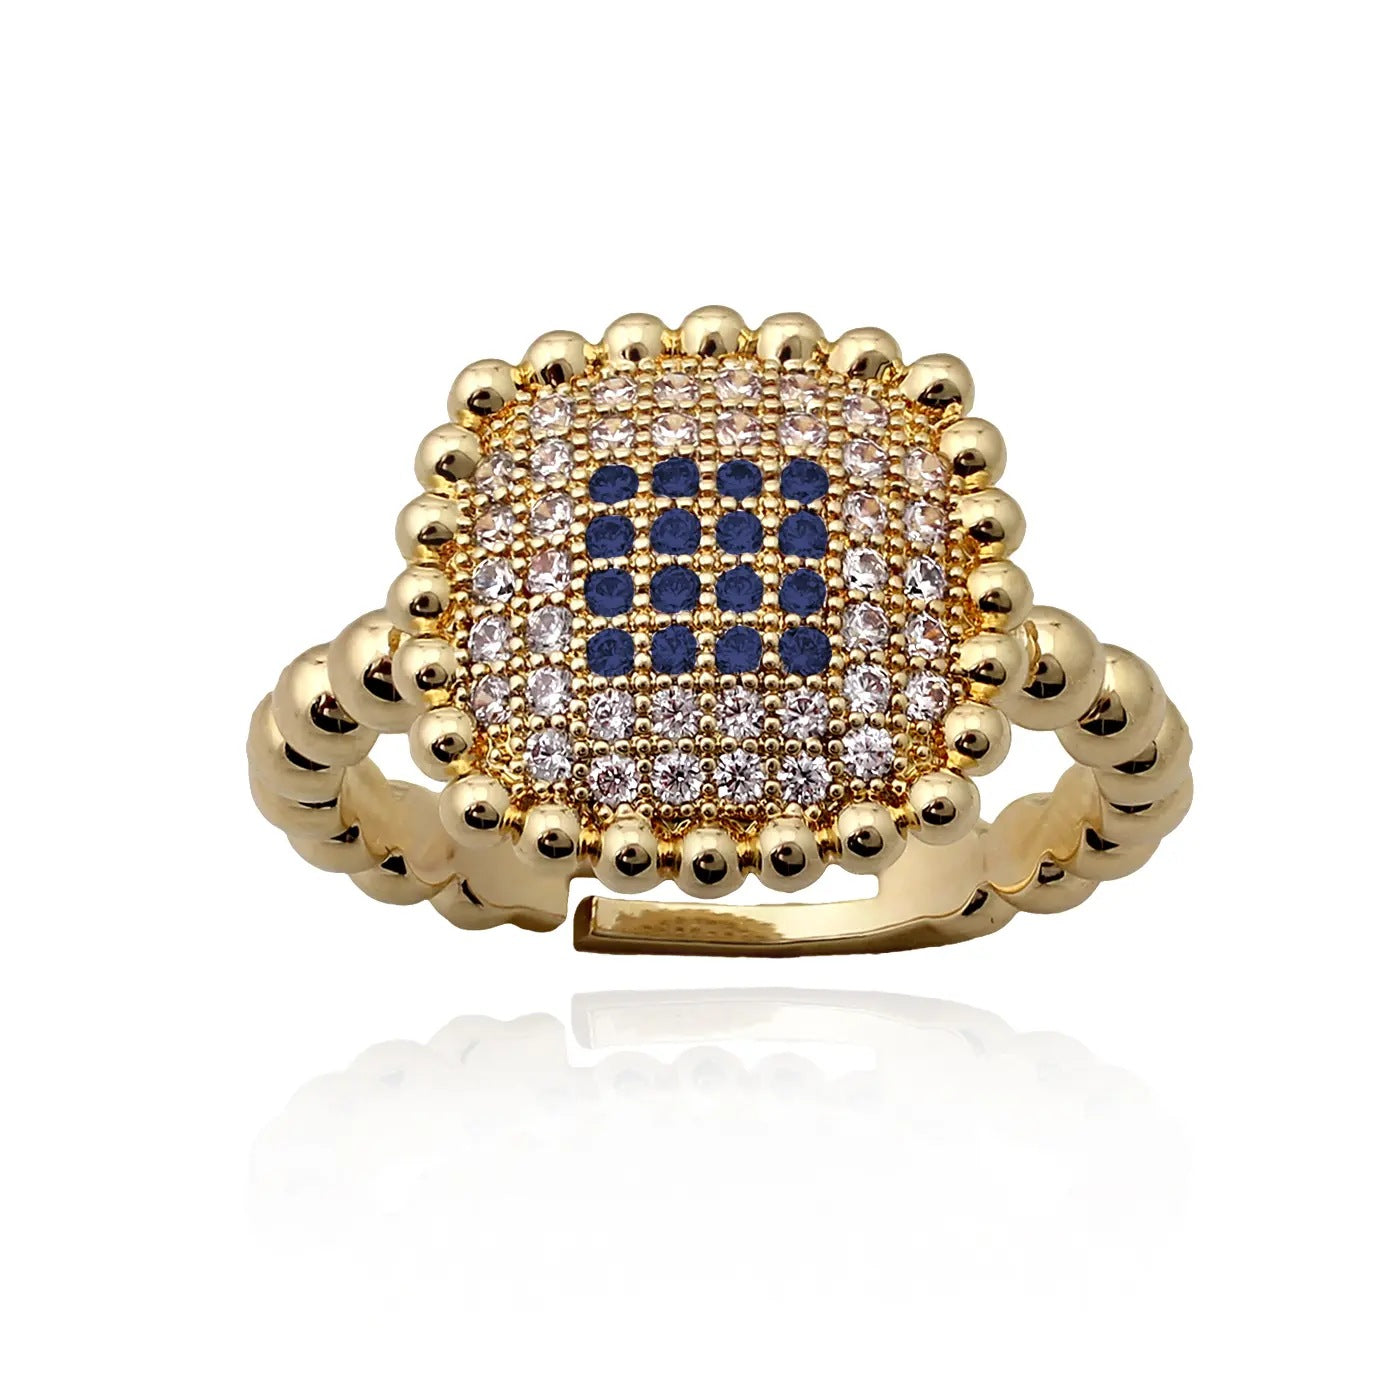 Gold Plated Square Pillow Ring - HK Jewels